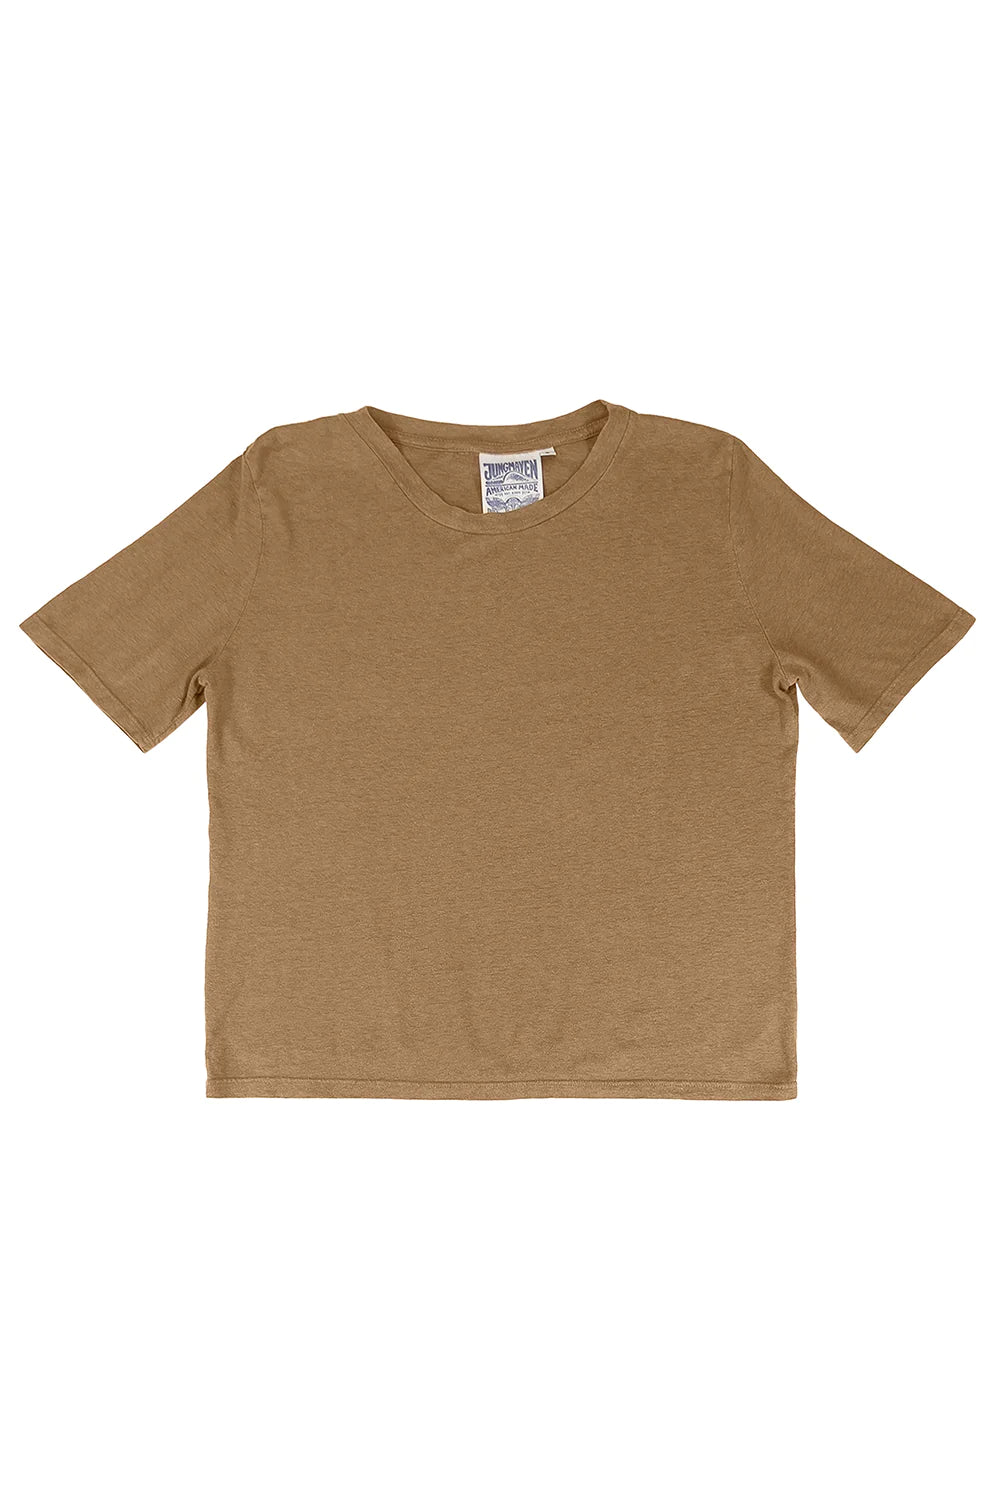 Jungmaven | Silverlake Cropped Tee - Coyote Brown